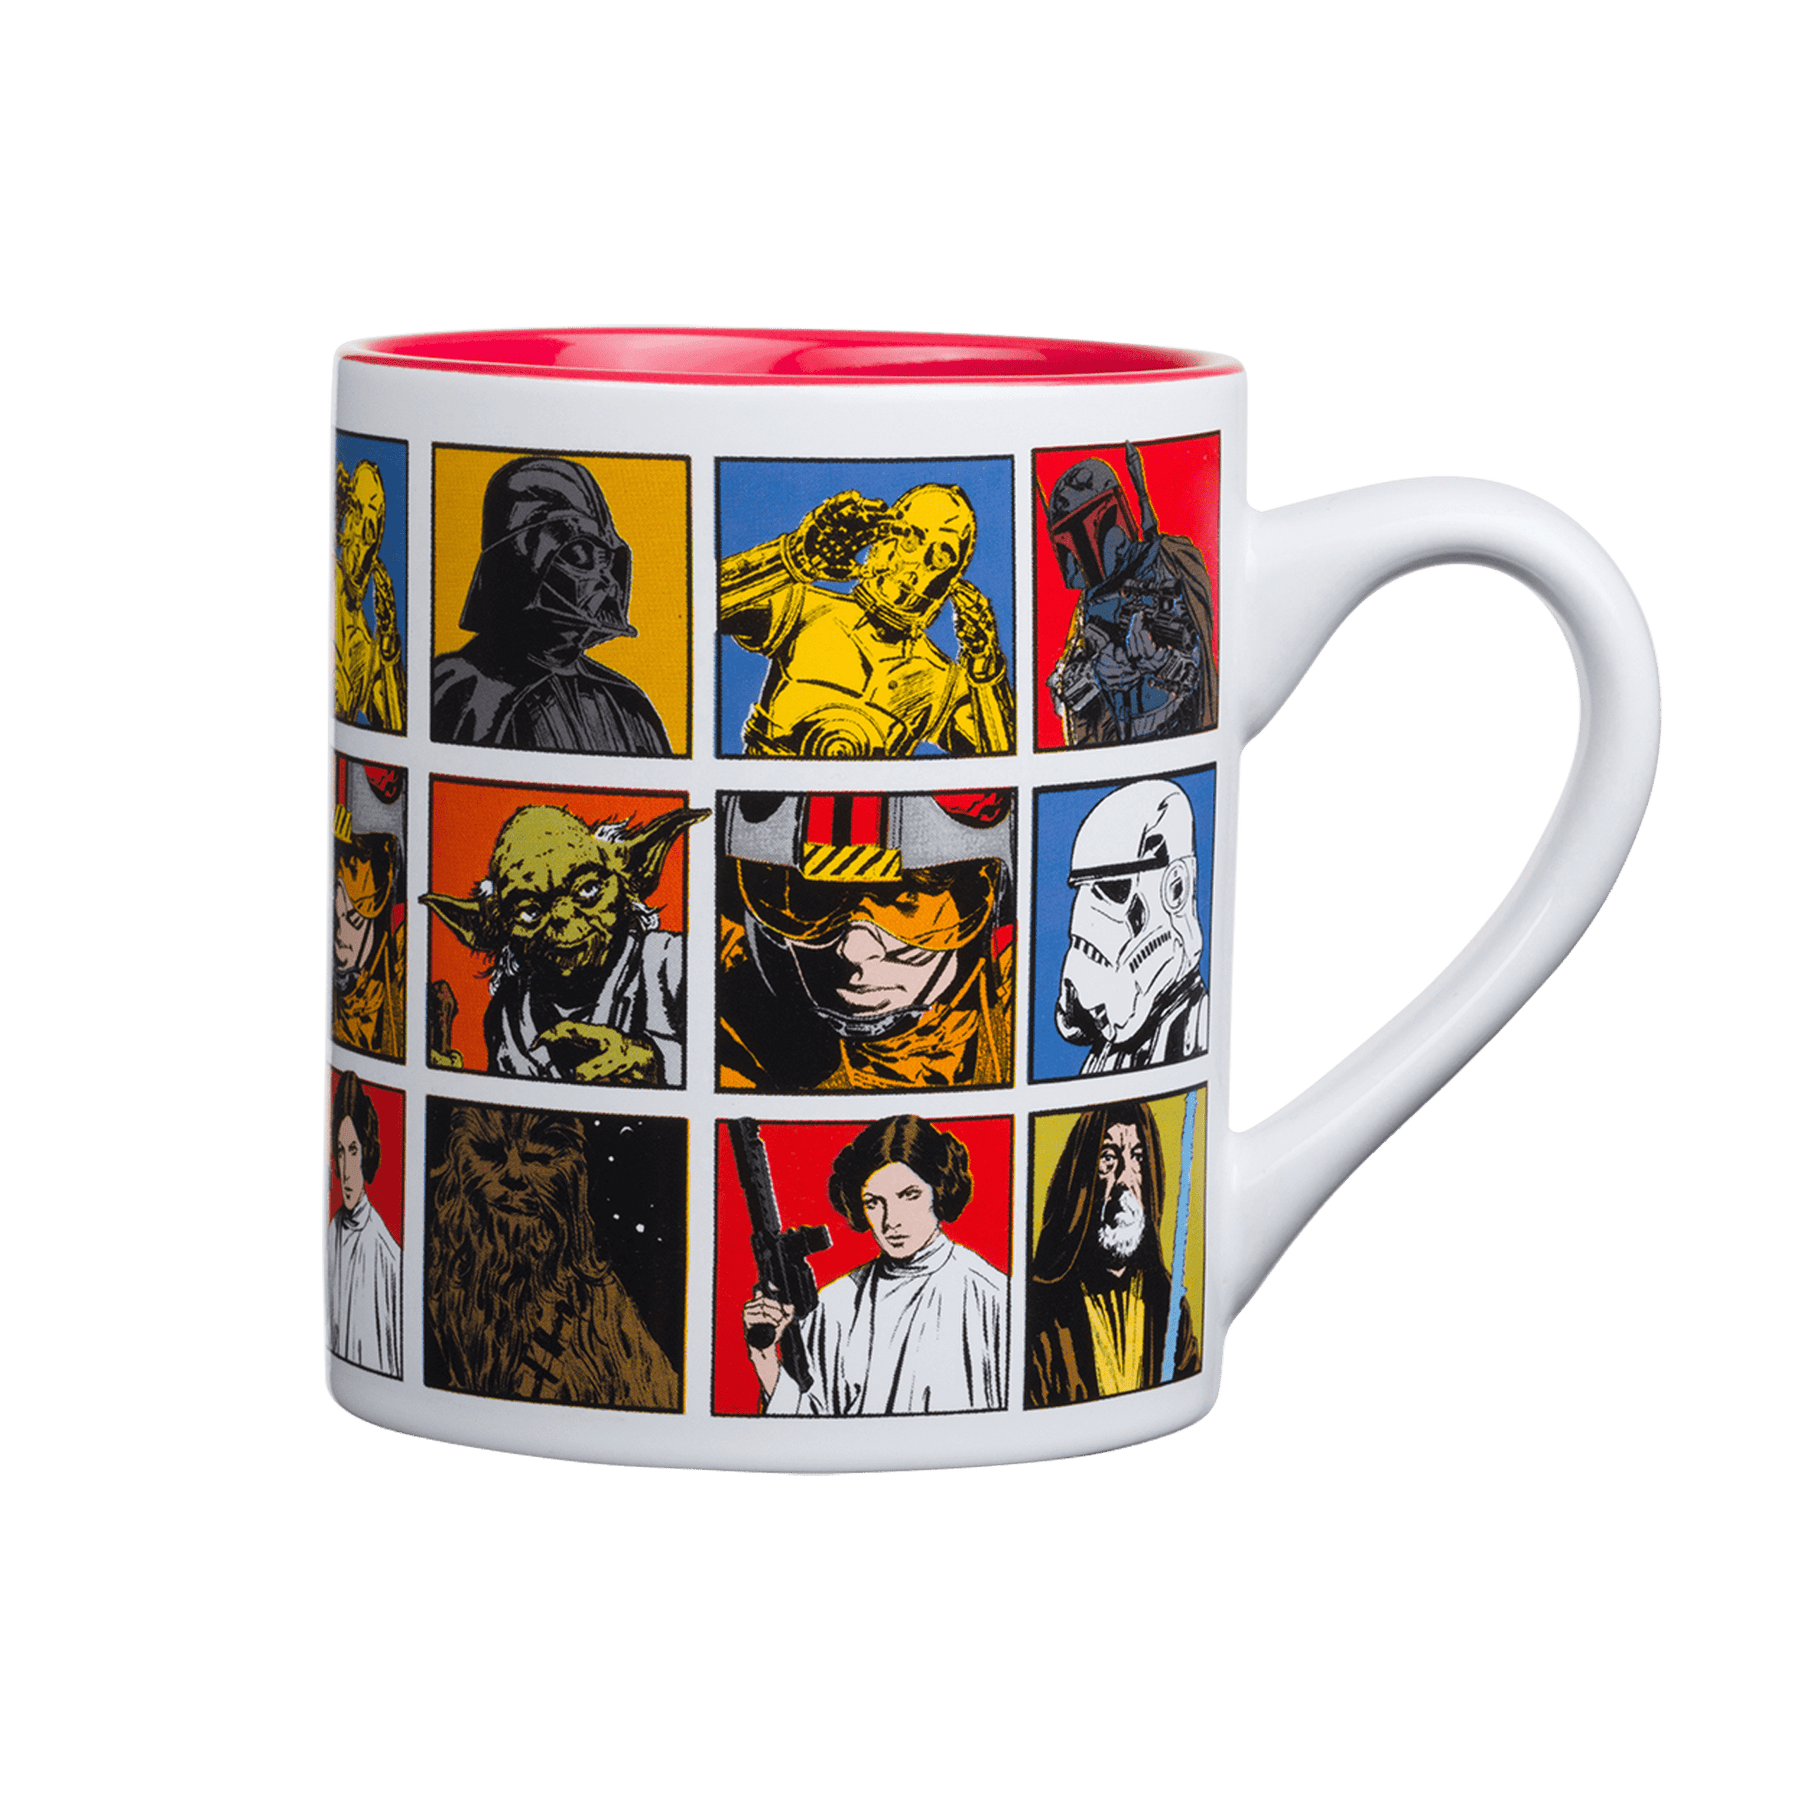 Star Wars: A New Hope Episode 4 Character Grid Ceramic Mug | Holds 14 Ounces